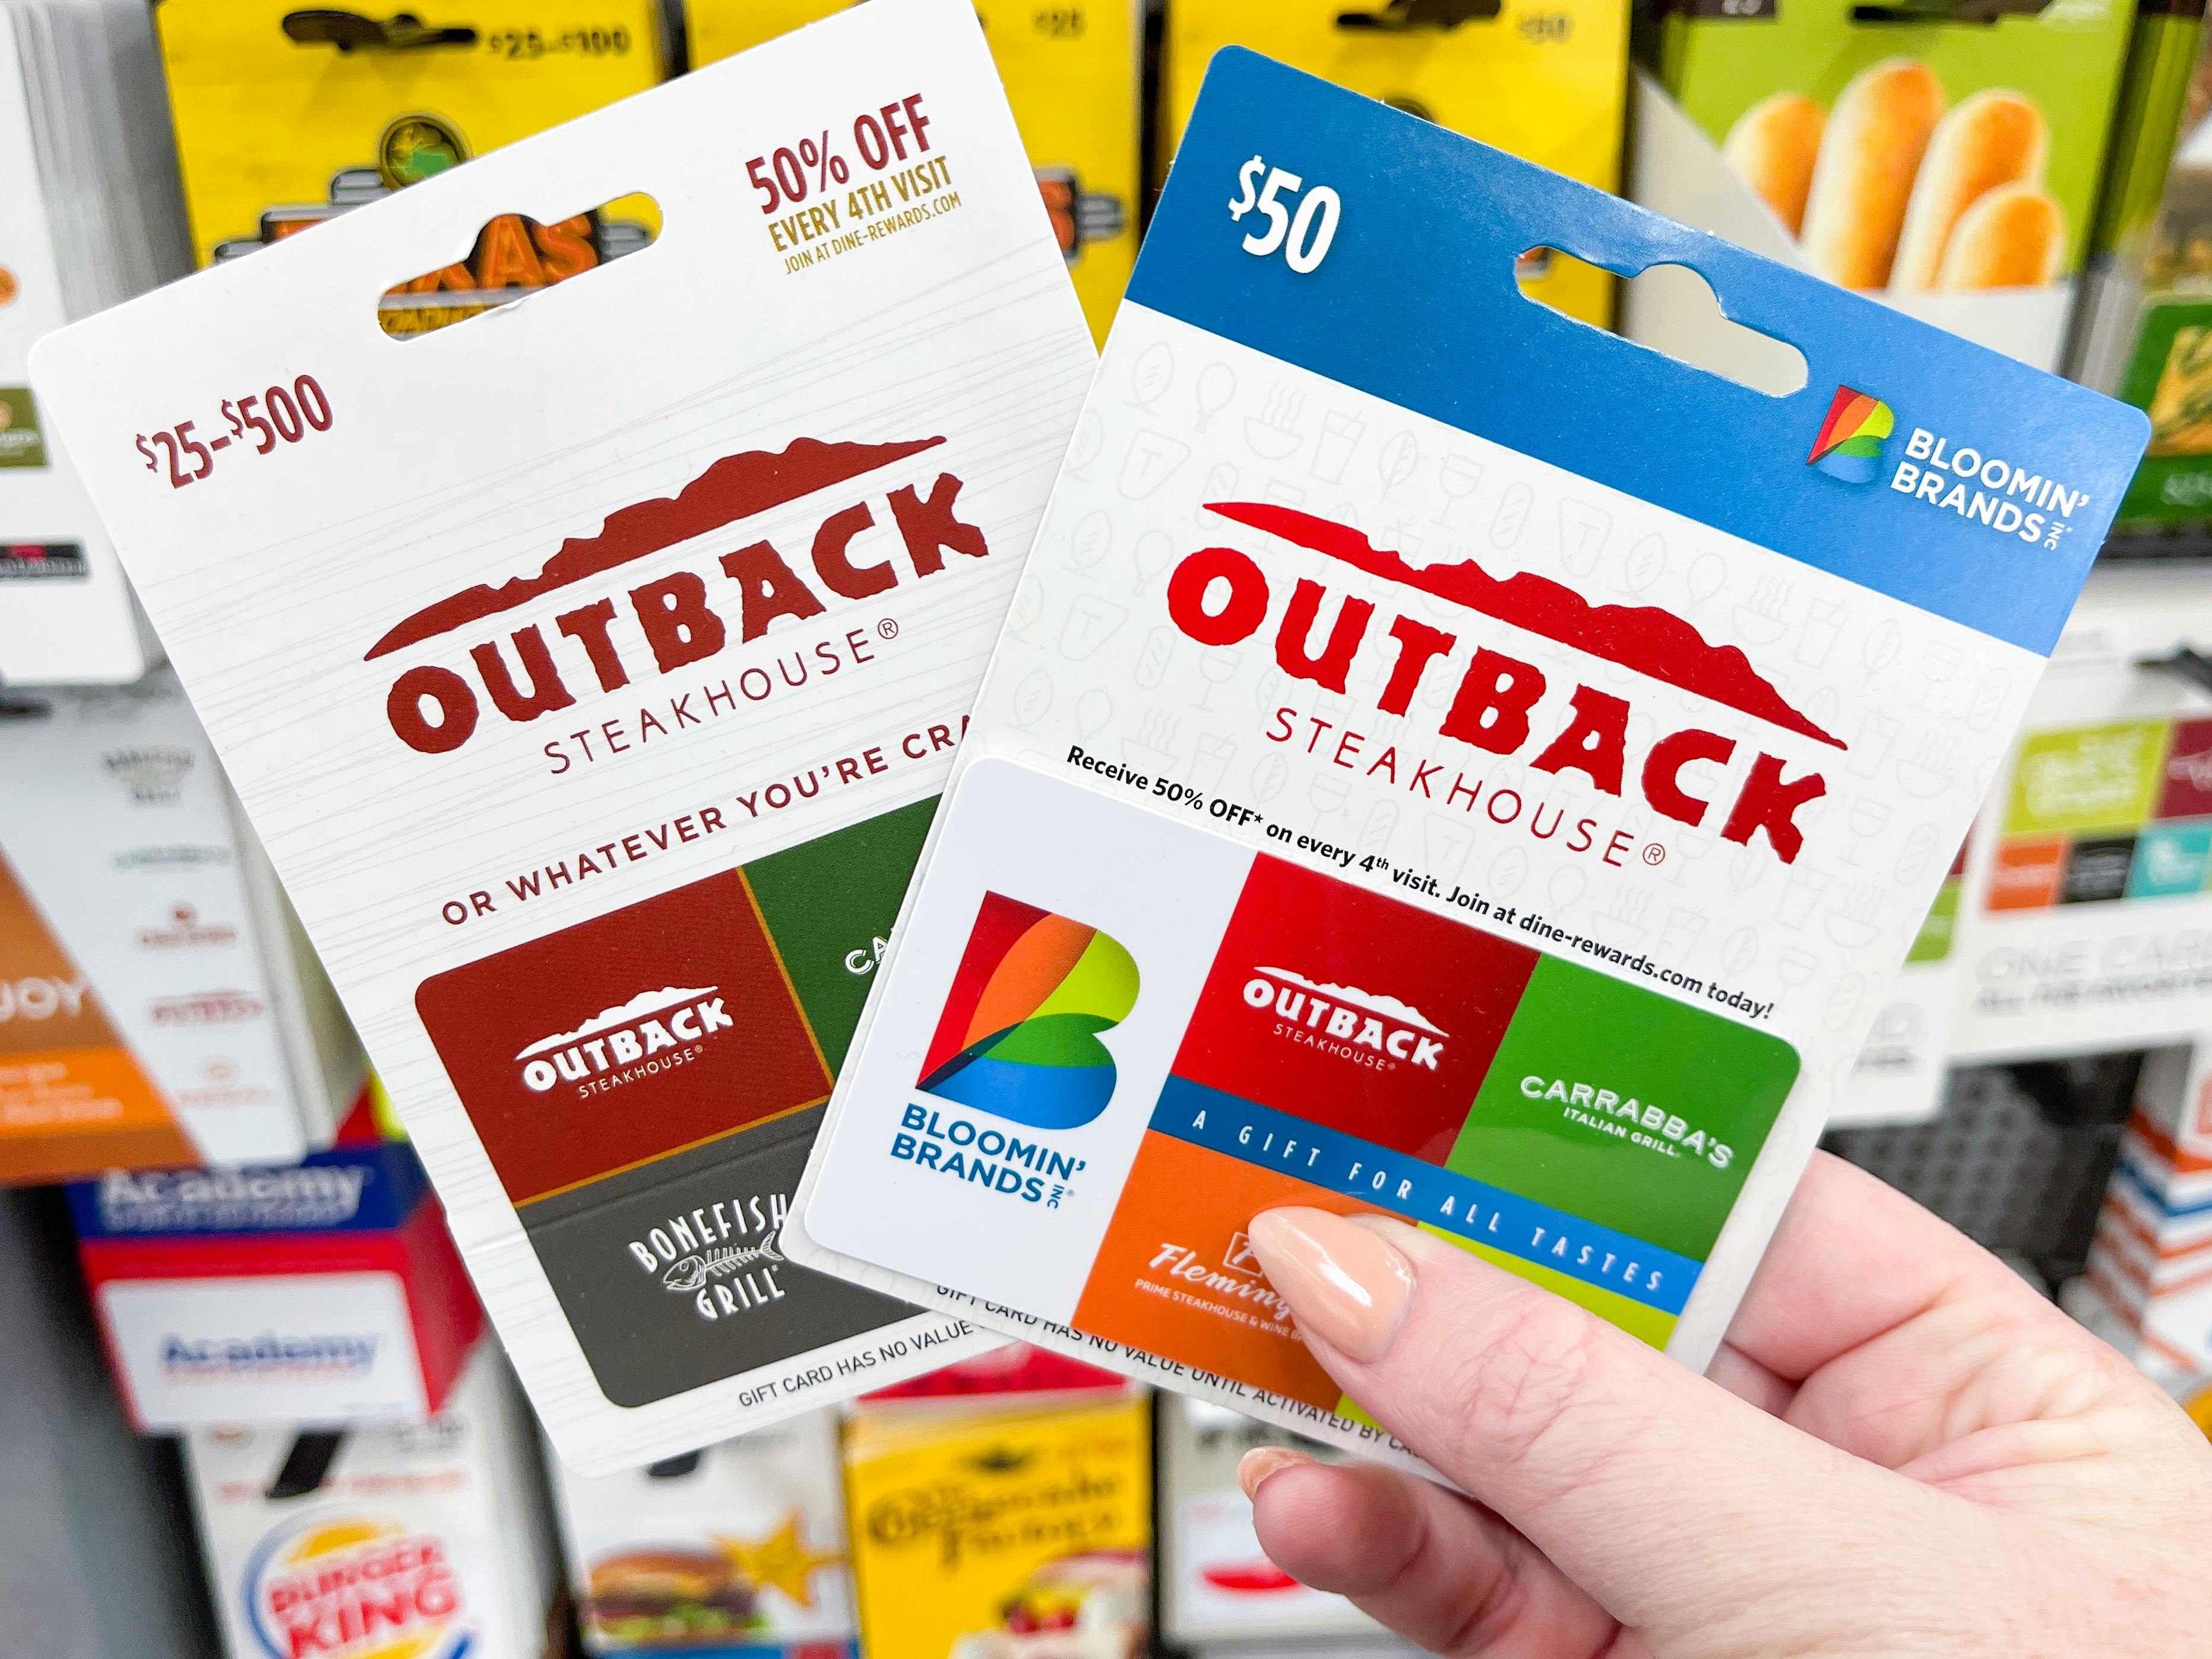 A person's hand holding two Outback Steakhouse gift cards in front of a display of gift cards.